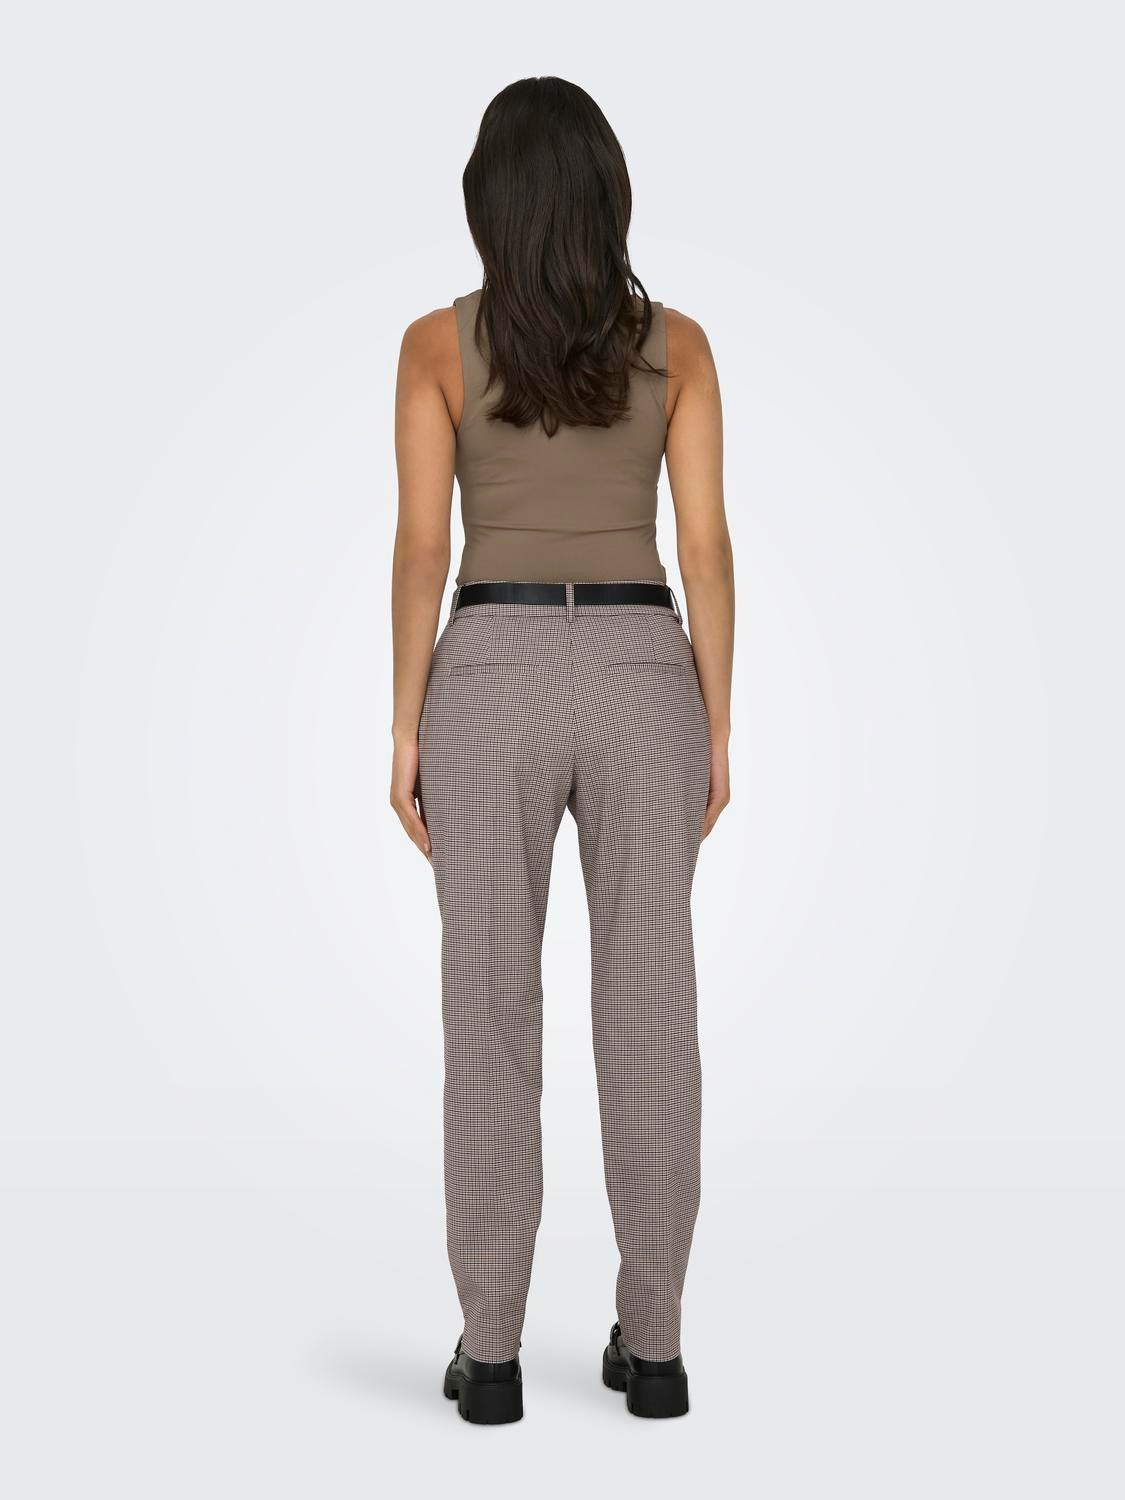 ONLY Trousers with high waist -Pumice Stone - 15313686